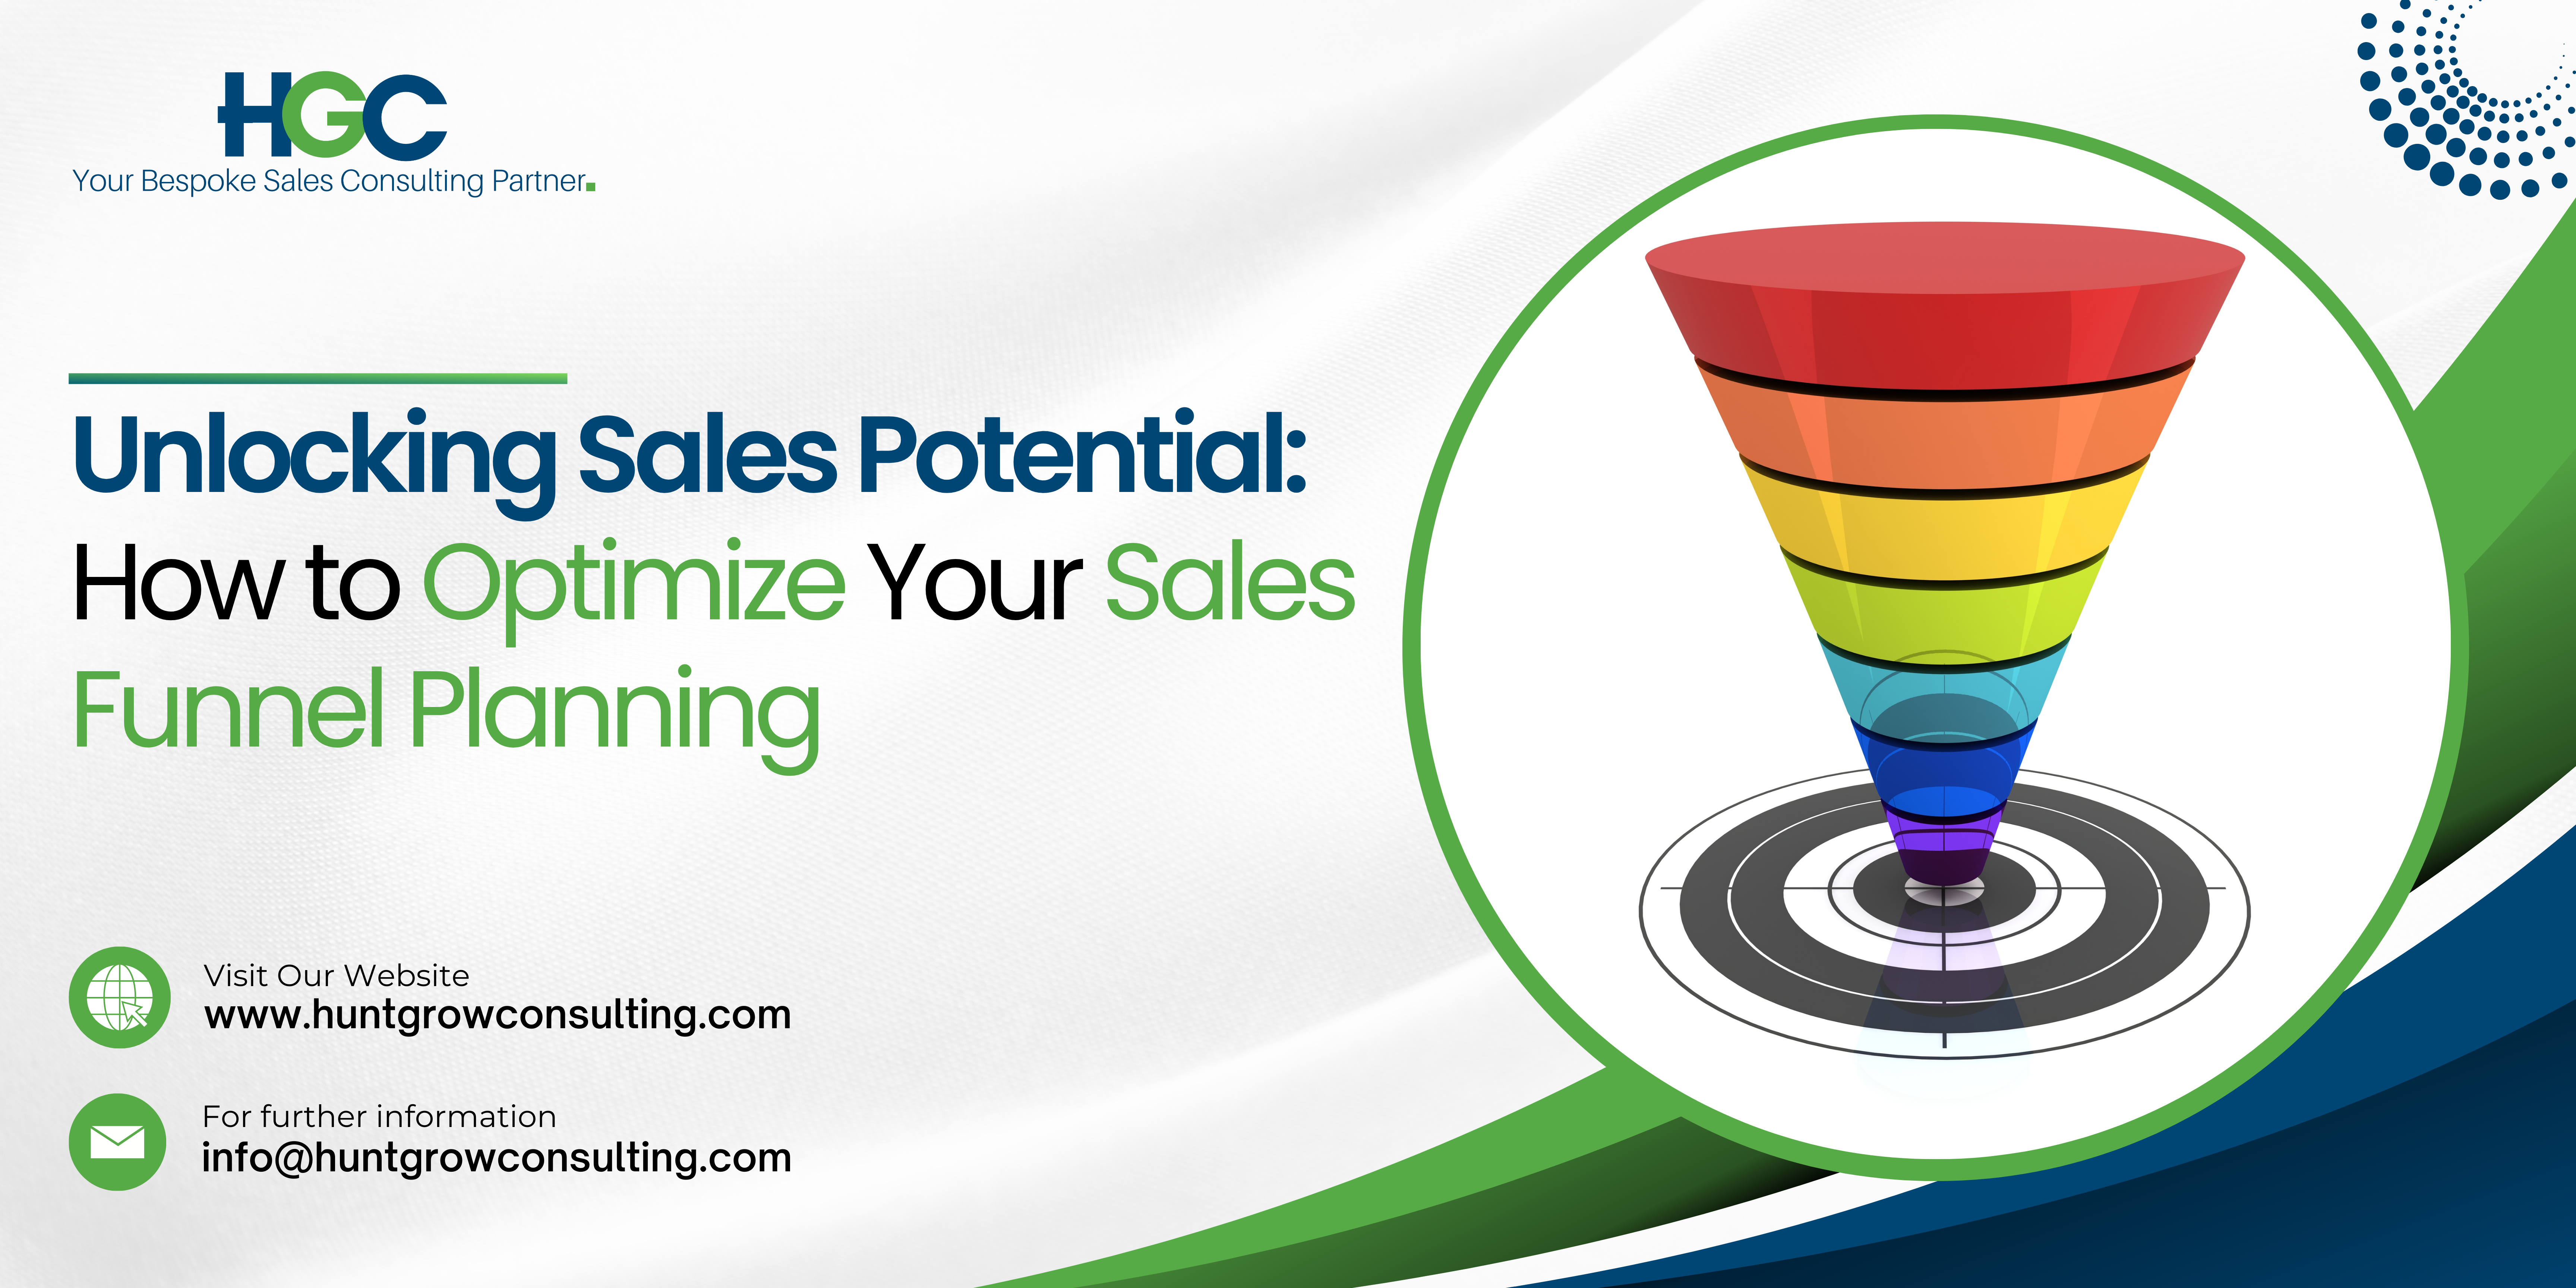 HOW TO OPTIMIZE YOUR SALES FUNNEL PLANNING - Hunt Grow Consulting